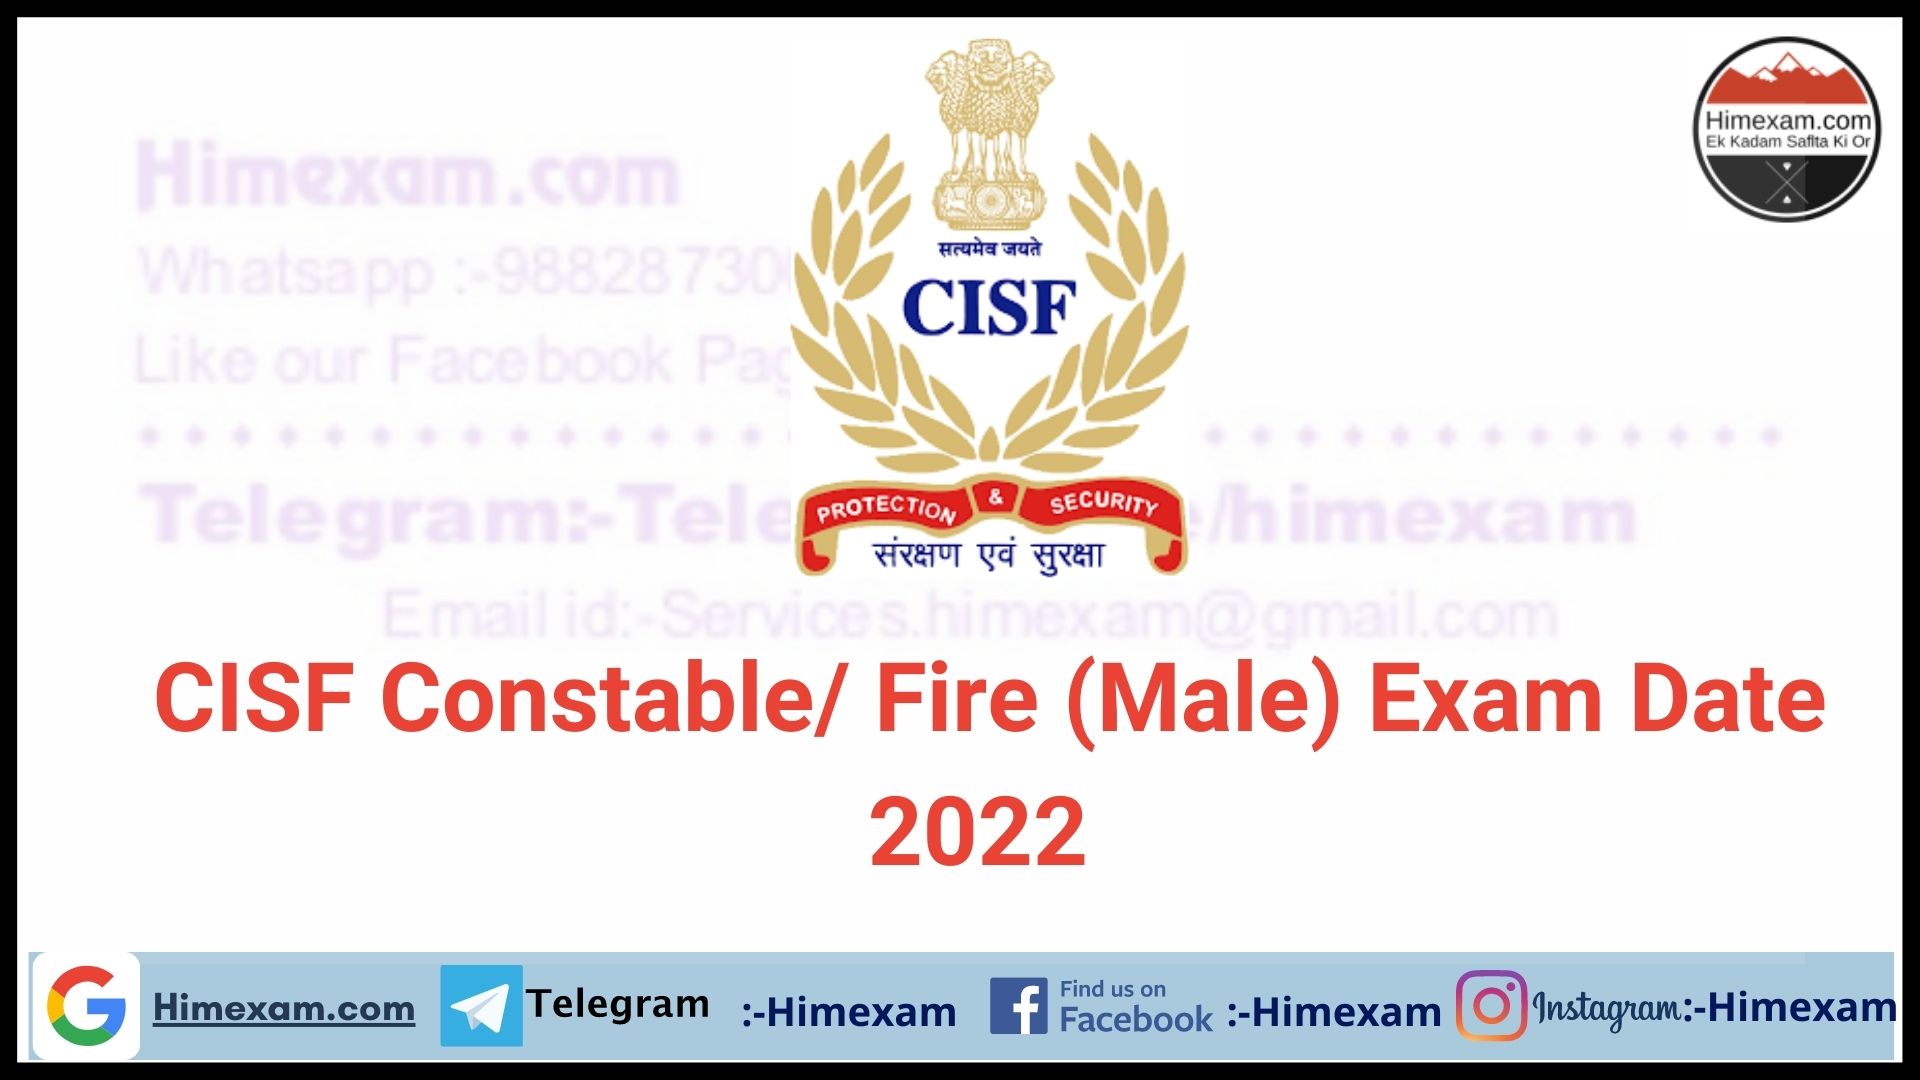 CISF Constable/ Fire (Male) Exam Date 2022